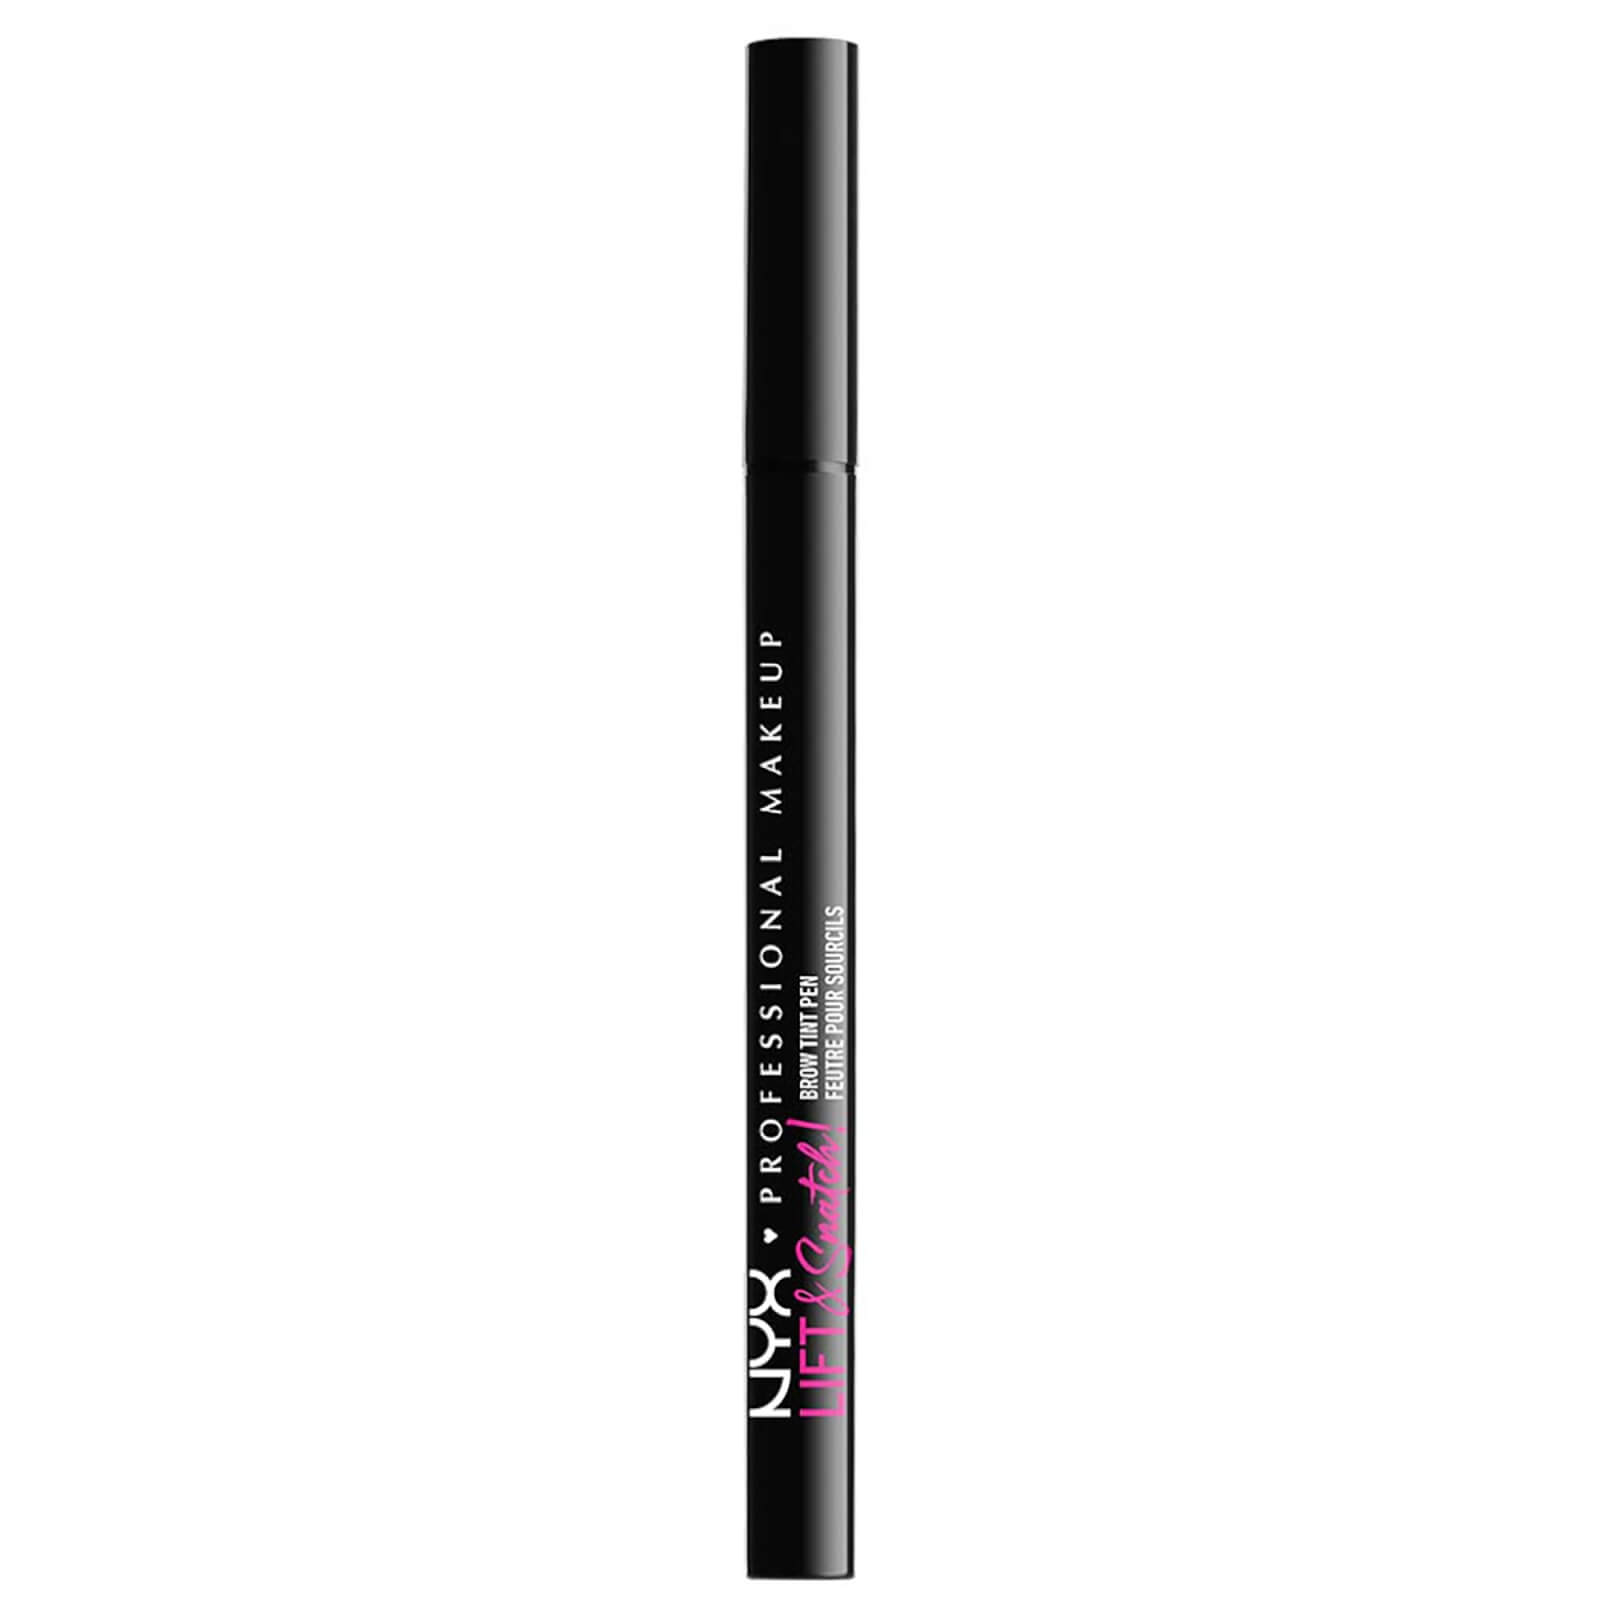 NYX Professional Makeup Lift and Snatch Brow Tint Pen 3g (Various Shades) - Ash Brown von NYX Professional Makeup